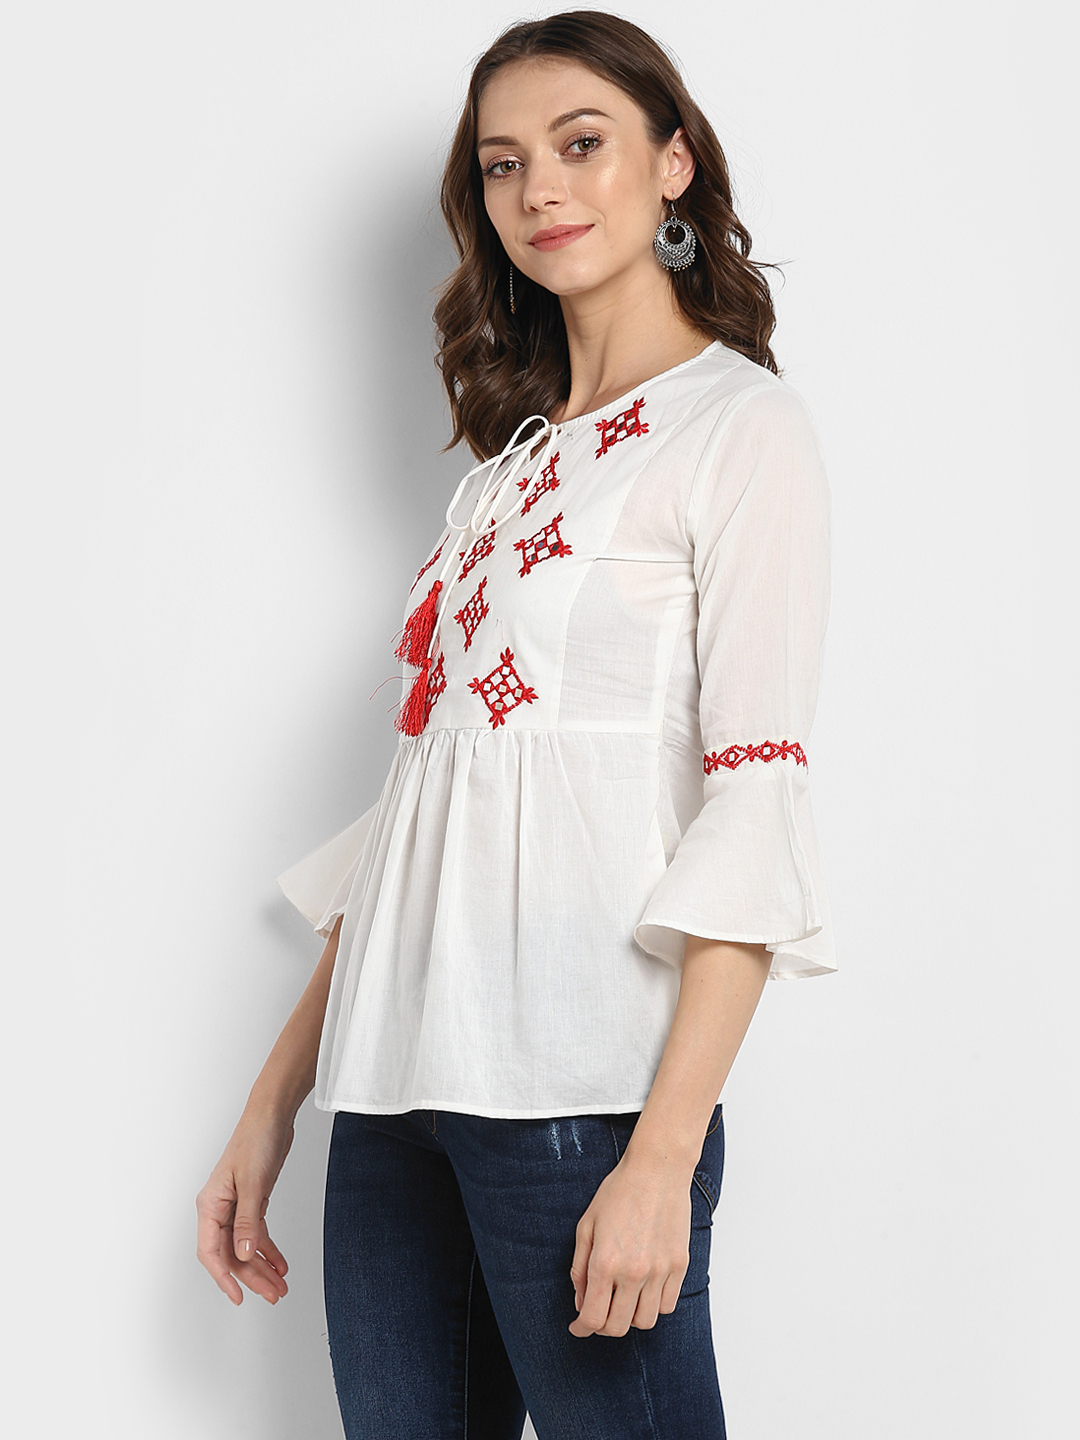 Women's  White Embellished A-Line Top - Wahe-NOOR